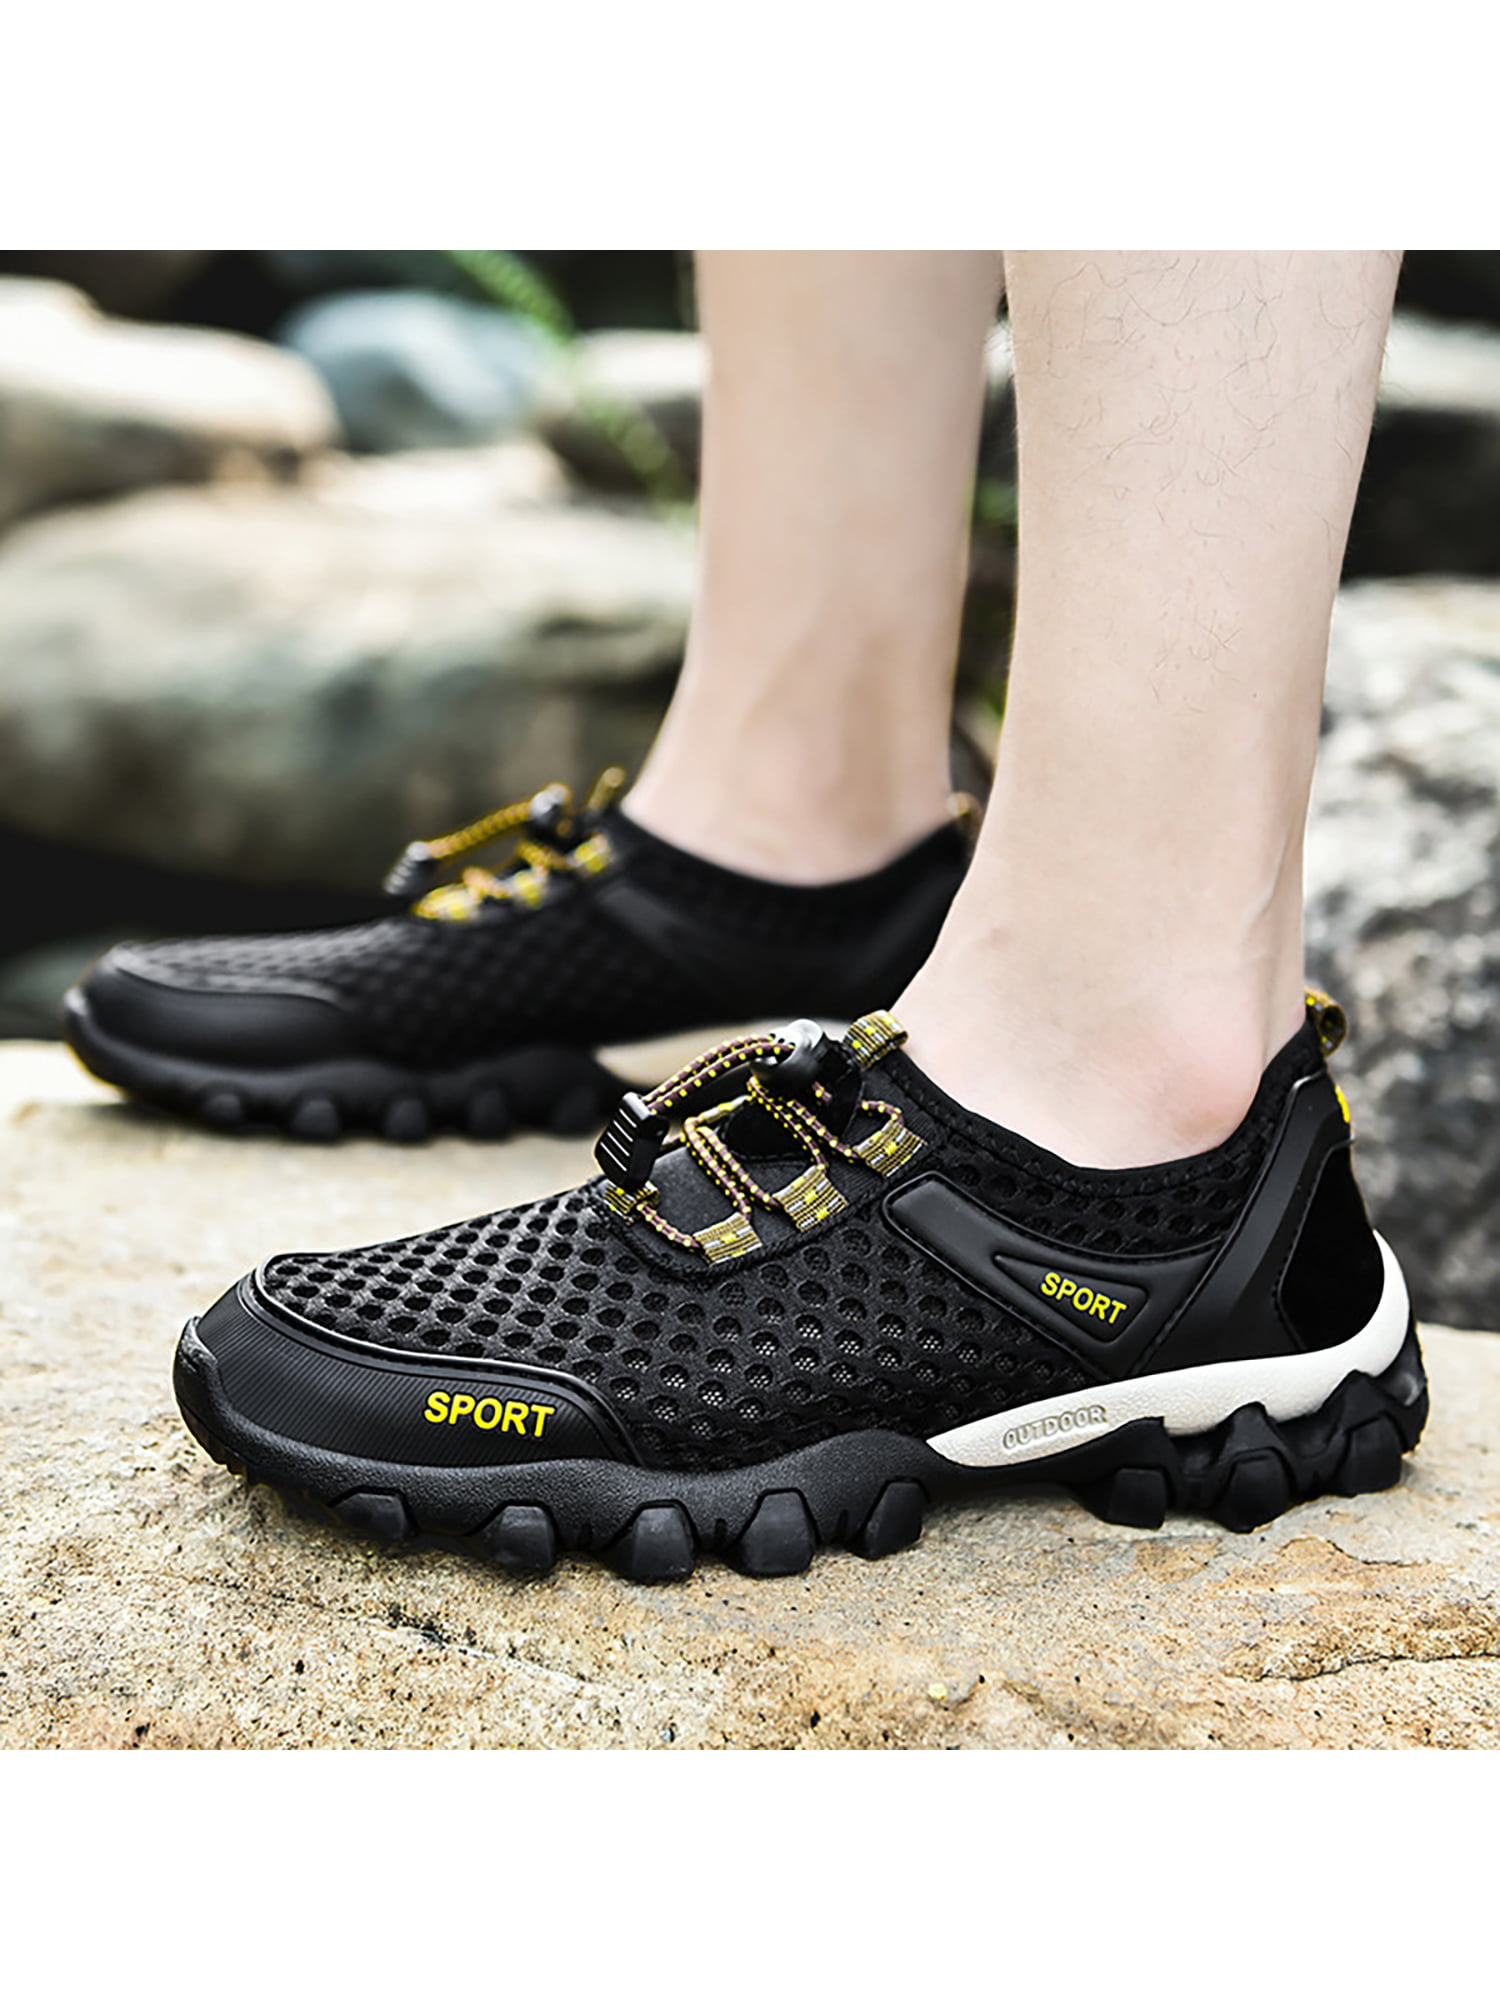 Men's Casual Shoes Slip On Fashion Sports Outdoor Sneakers Hiking Climbing Shoes